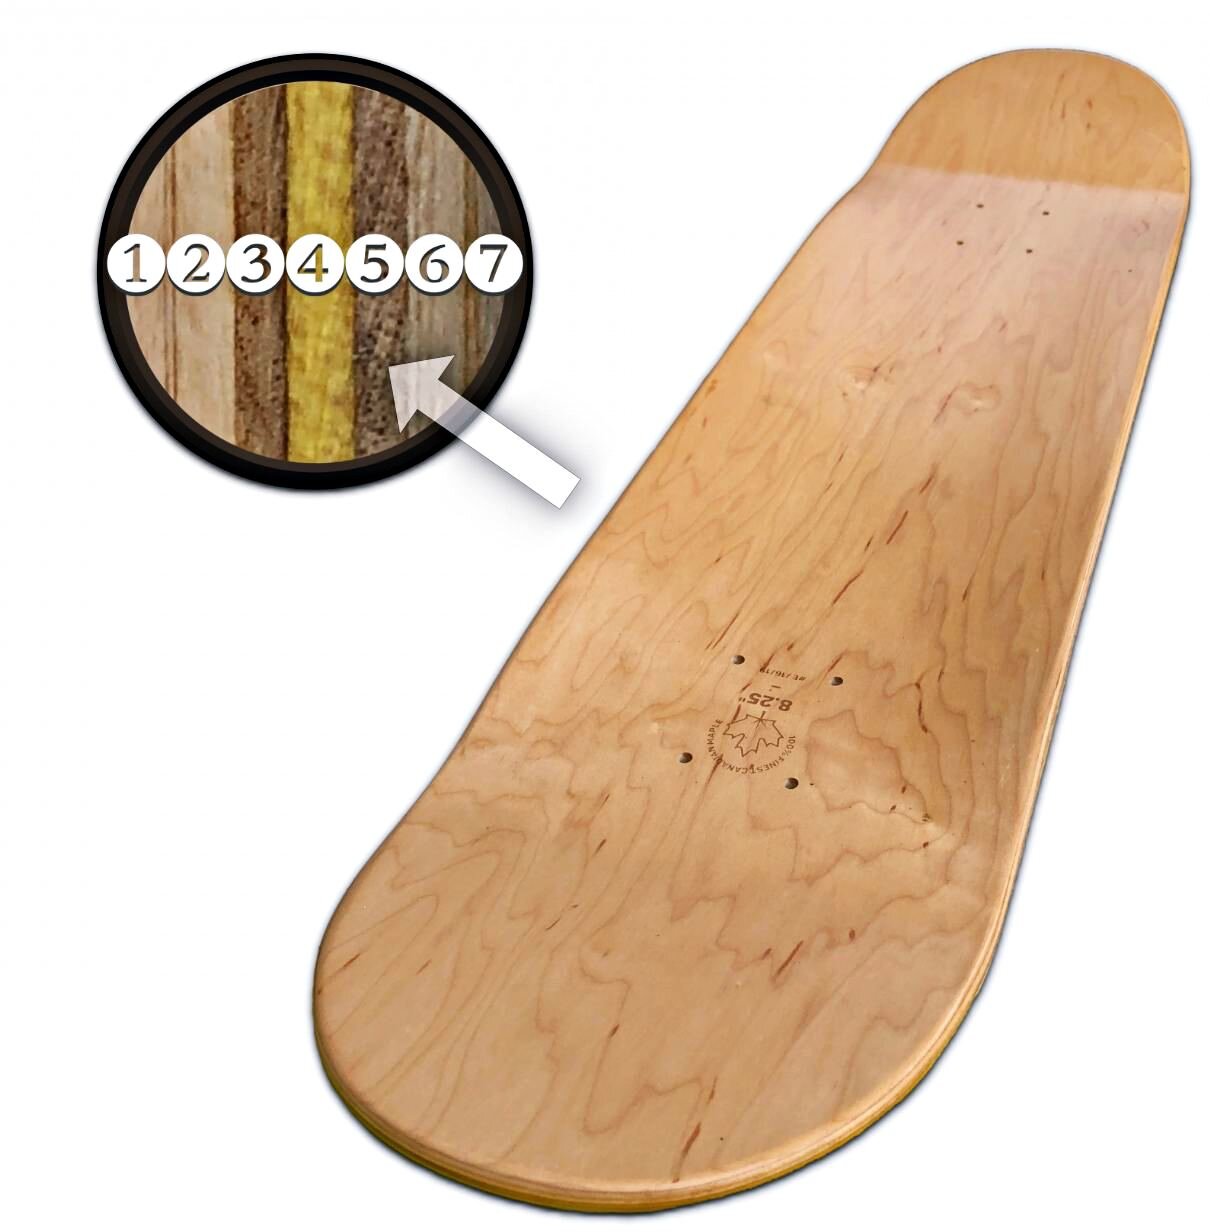 Illustration of a skateboard with 7 layers